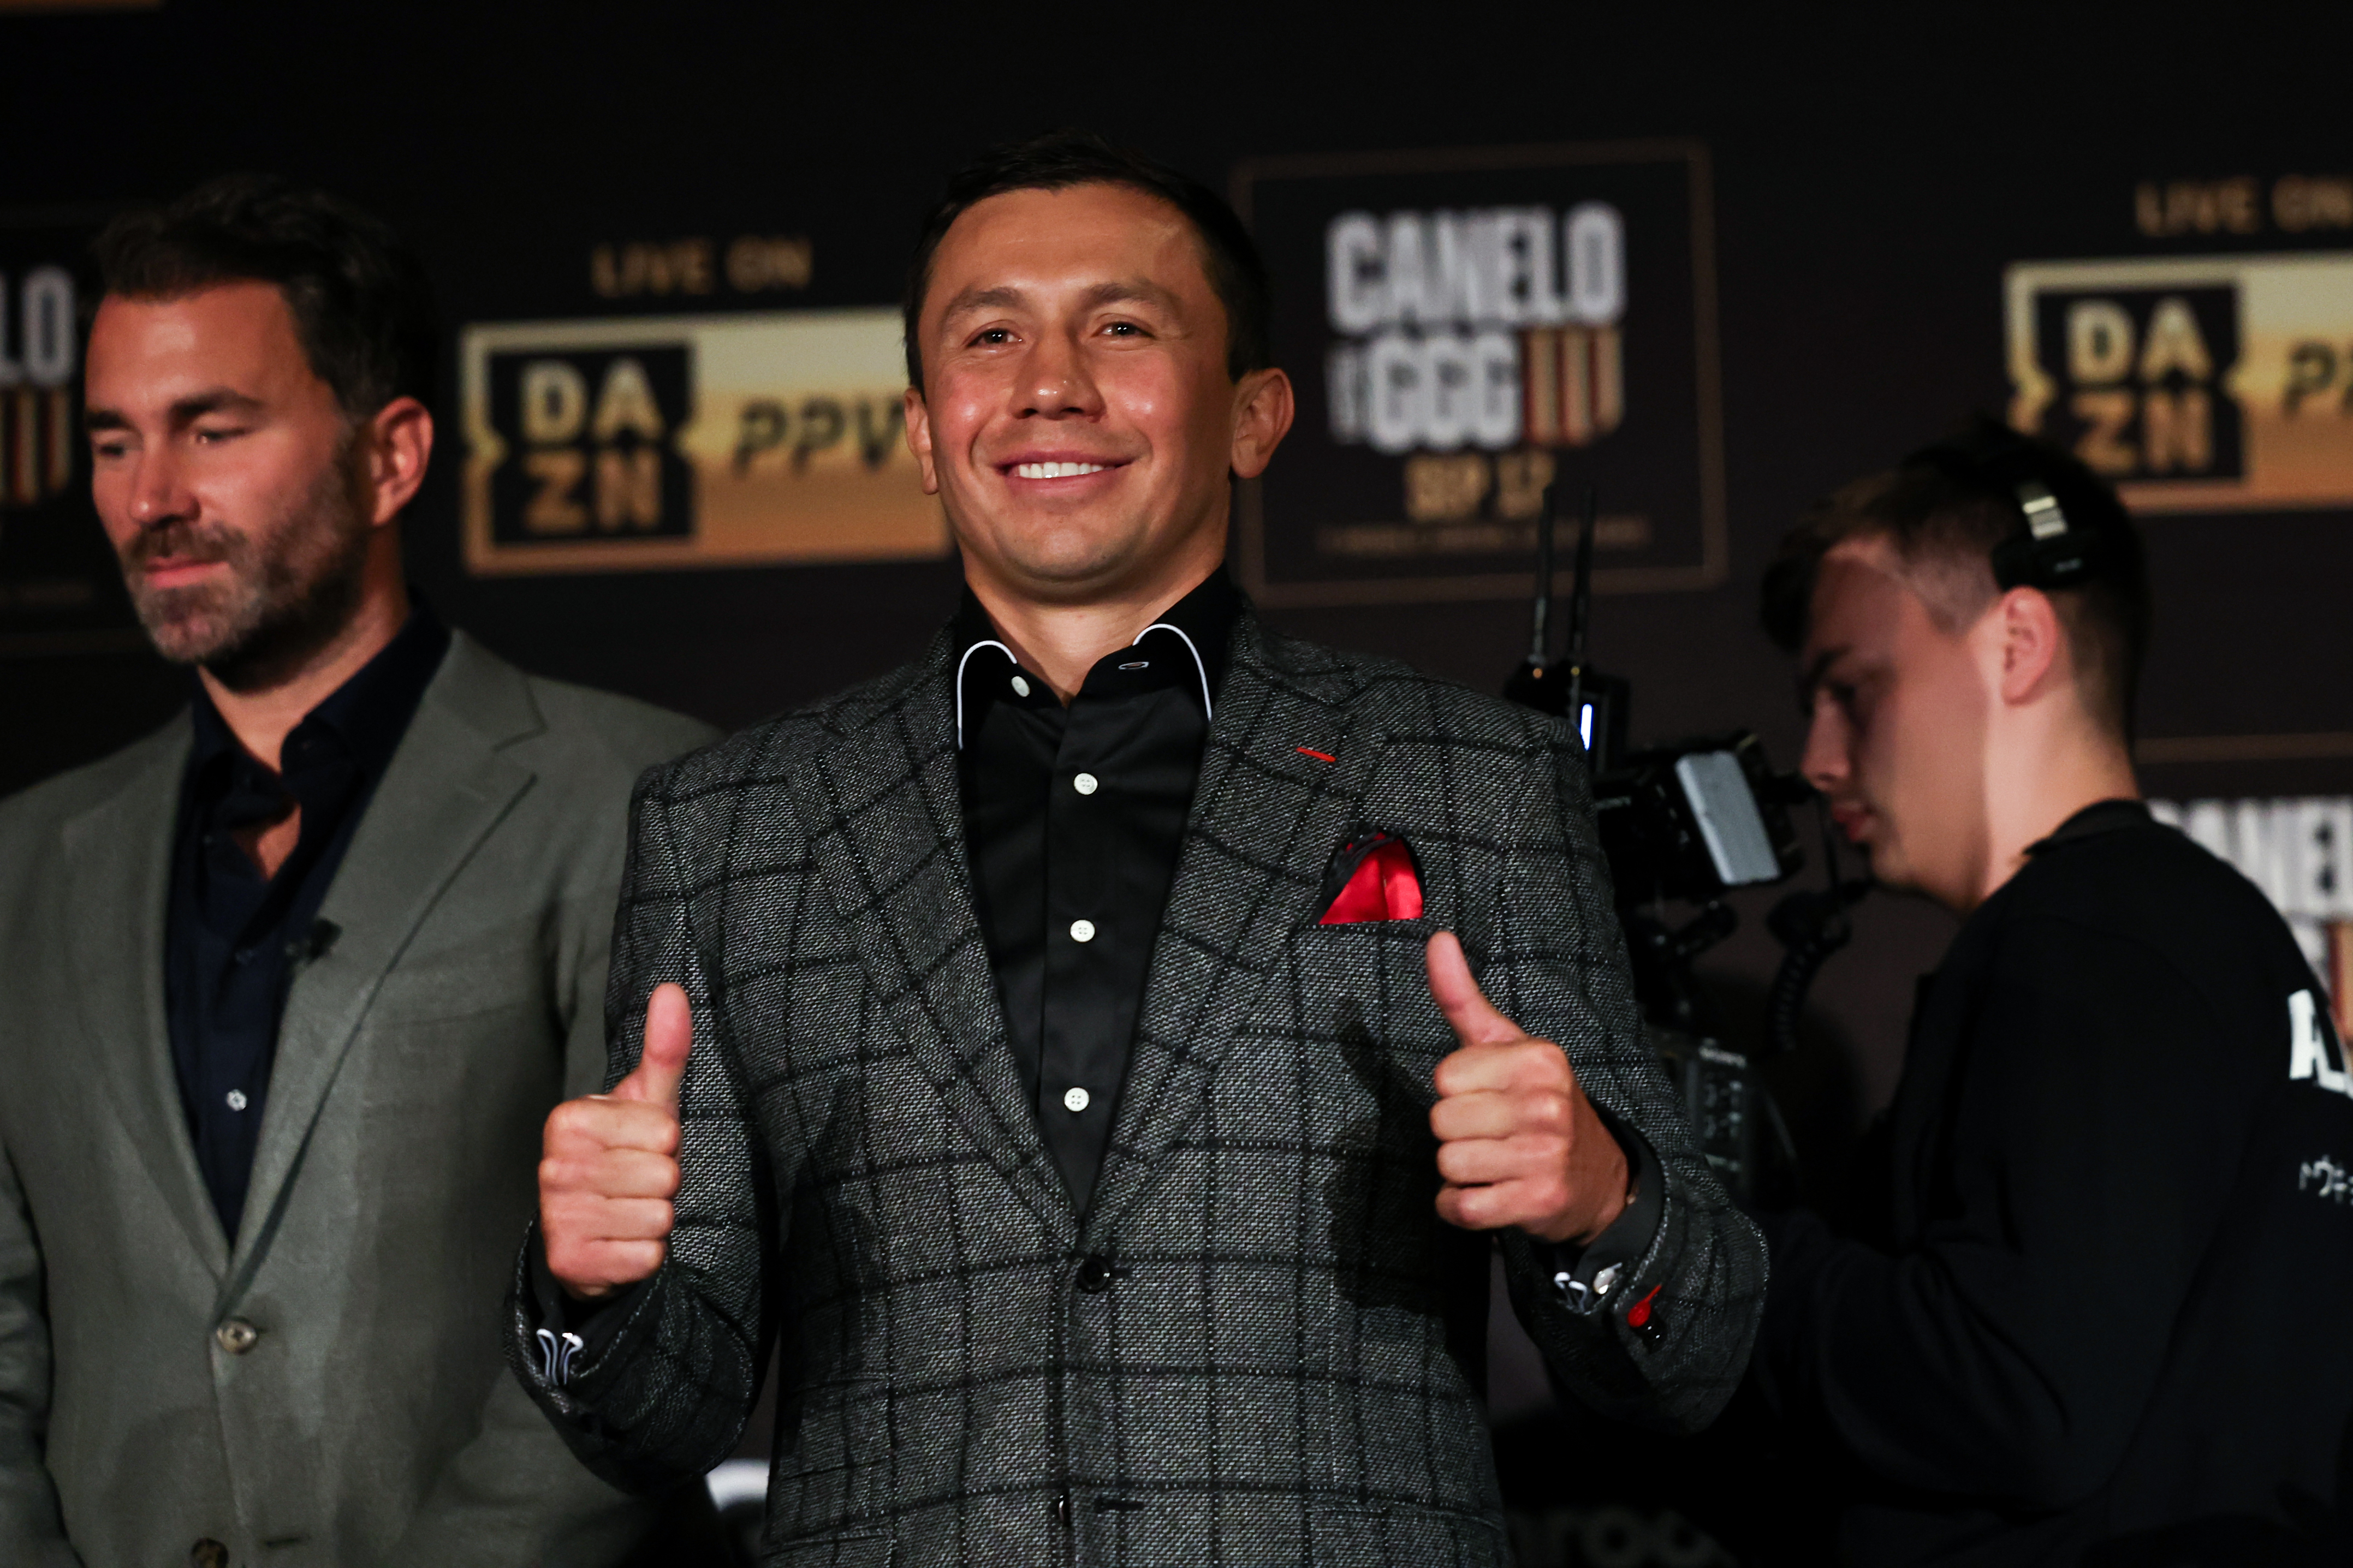 Gennadiy Golovkin gets perhaps his last chance at vindication in his upcoming fight against Canelo Alvarez.